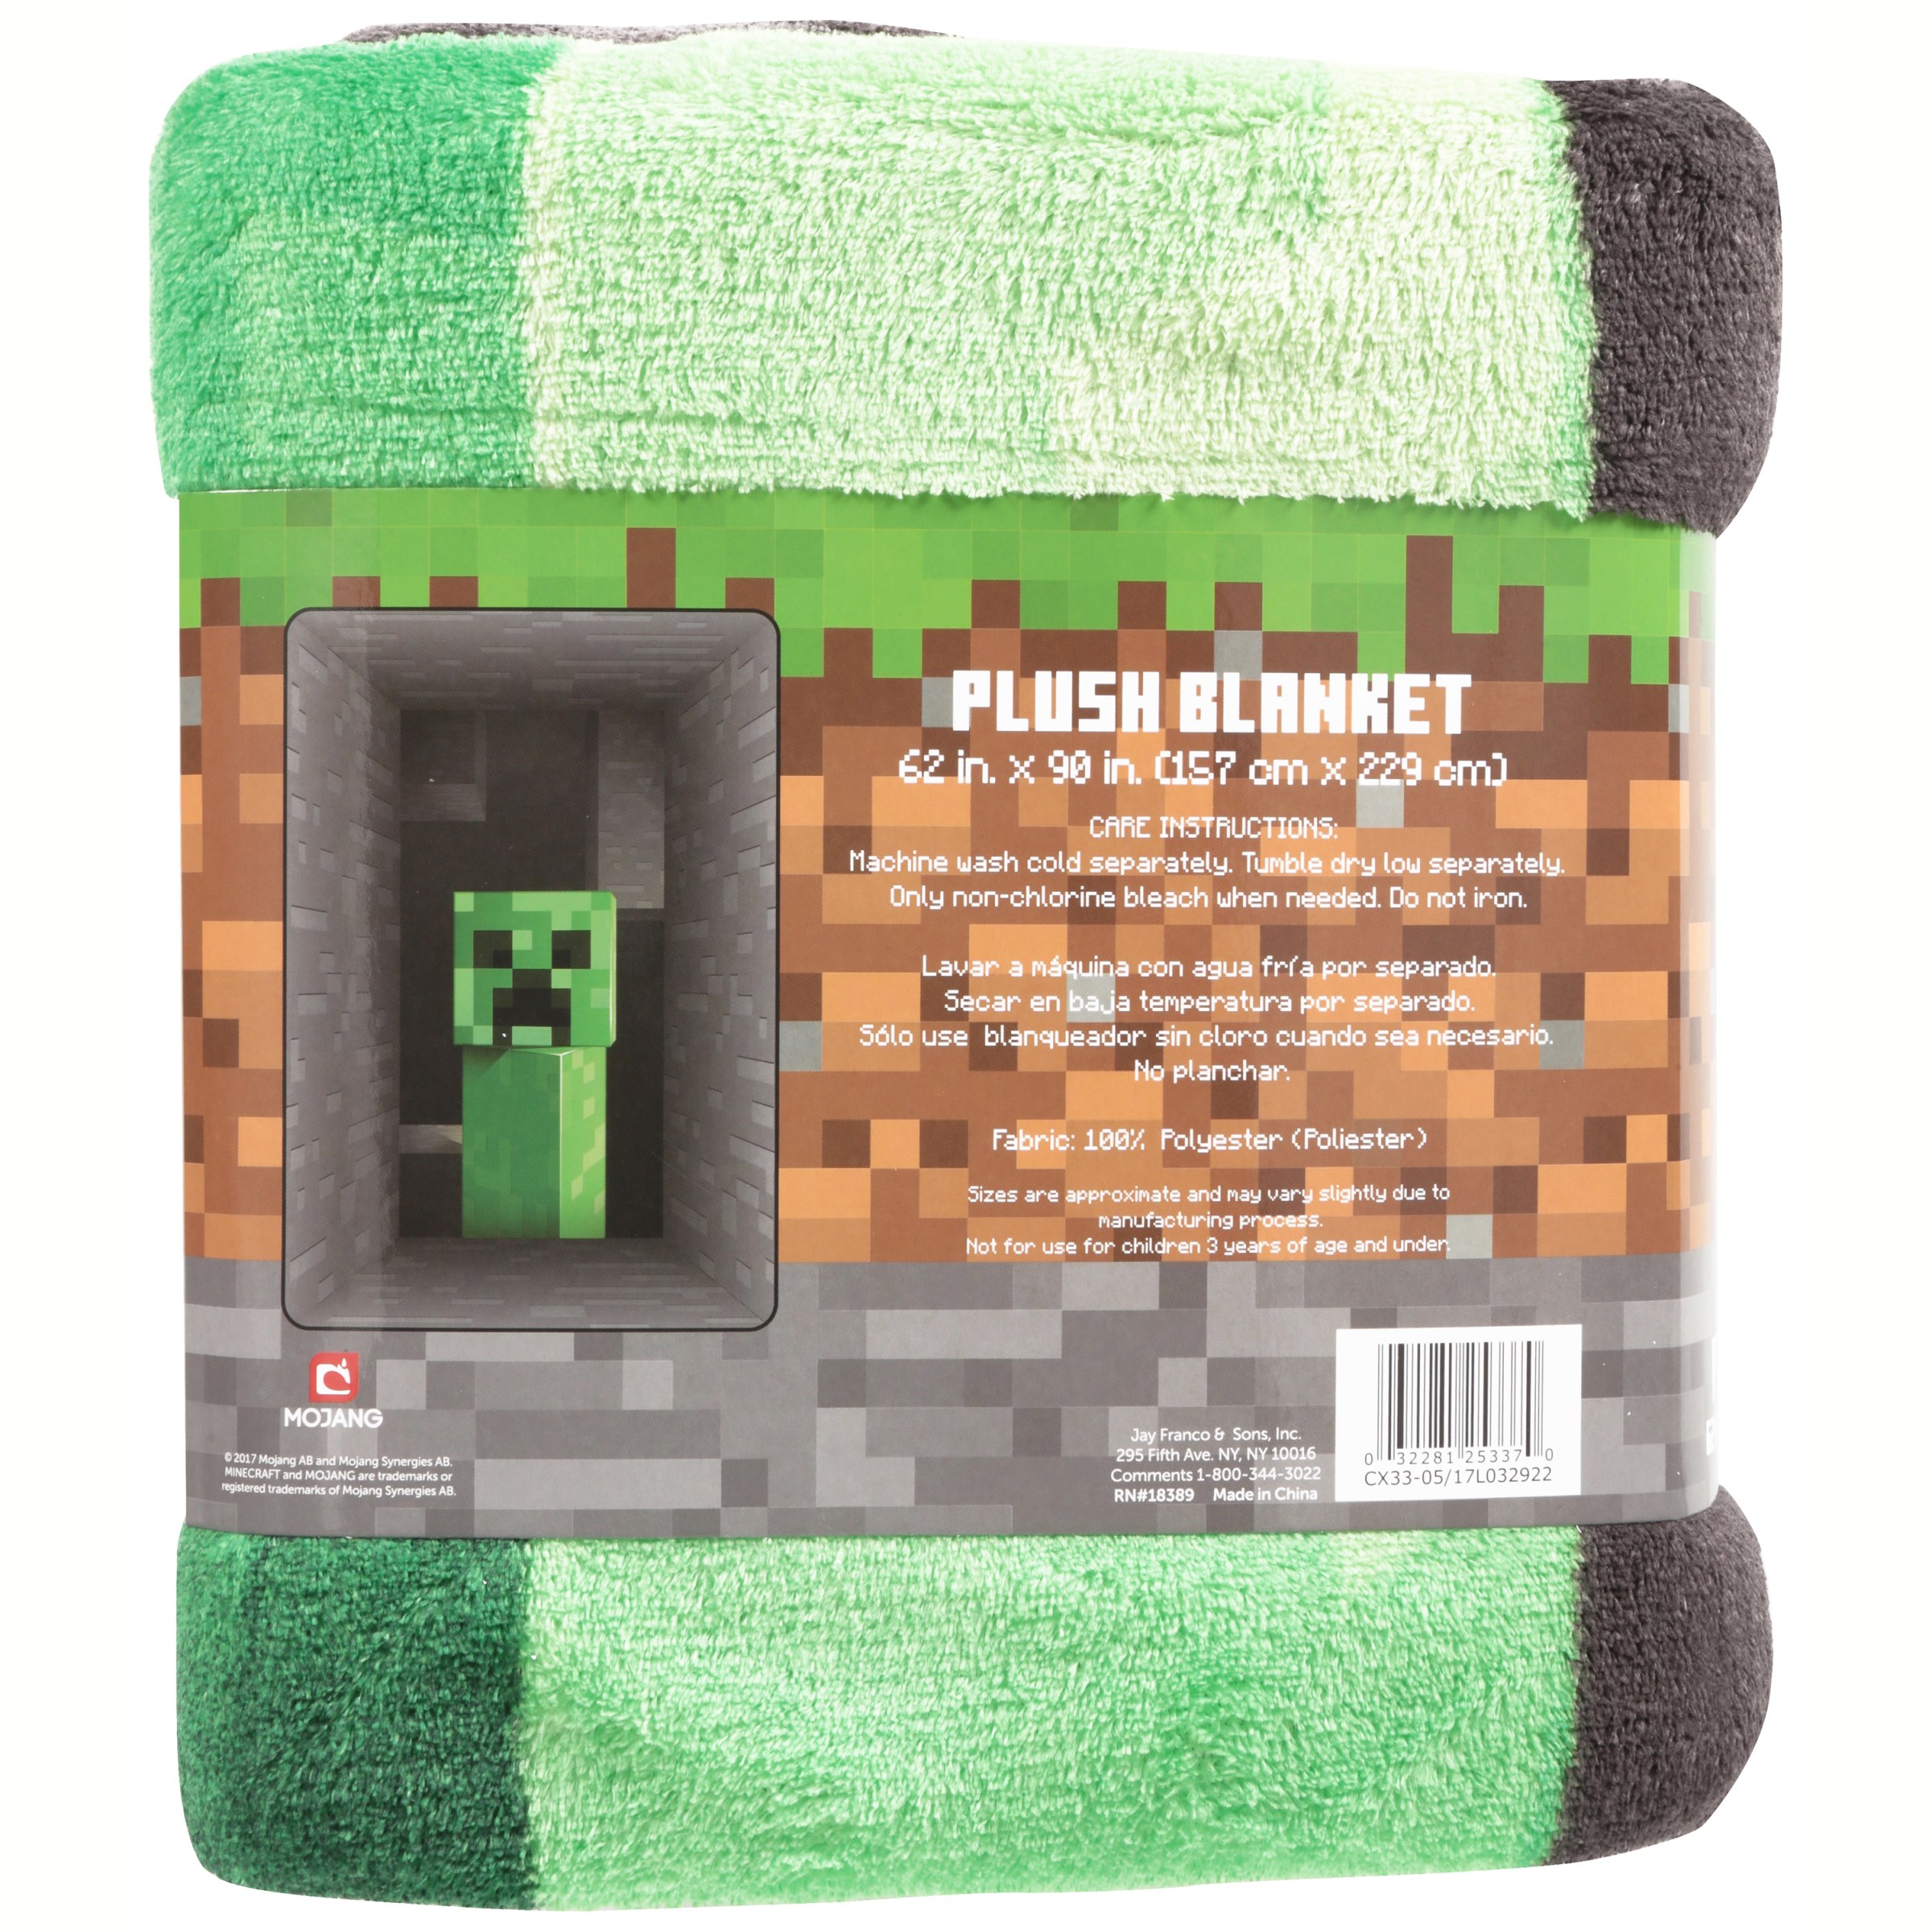 Minecraft 62" x 90" Plush Blanket, 1 Each, Gaming Bedding - image 4 of 5